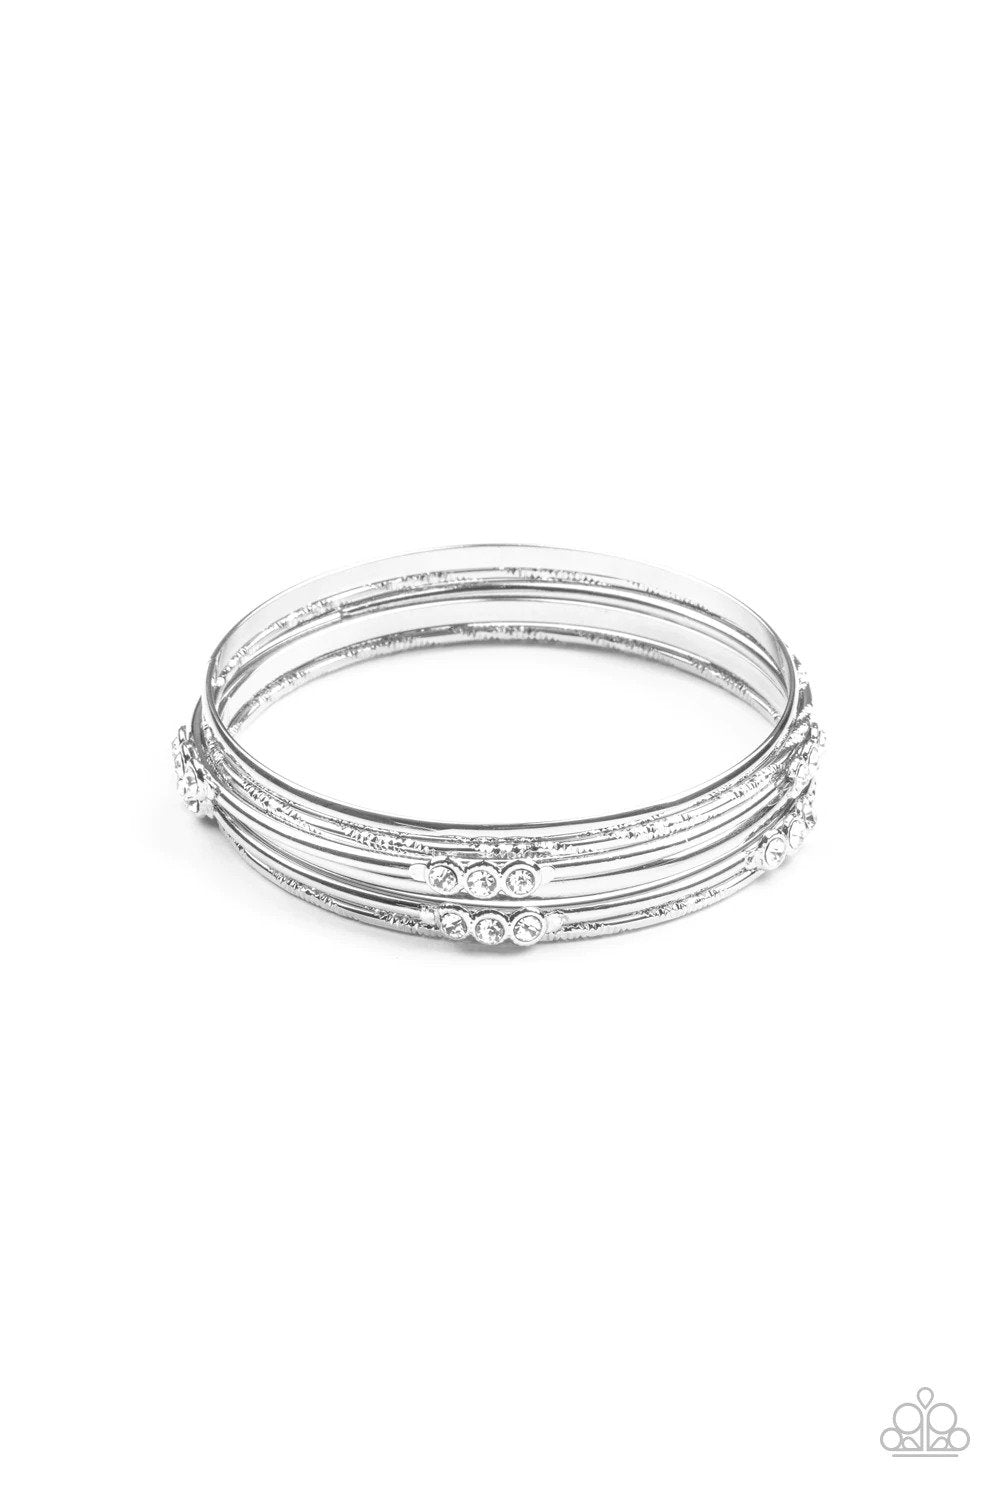 Stackable Sparkle White Bracelet - Paparazzi Accessories- lightbox - CarasShop.com - $5 Jewelry by Cara Jewels